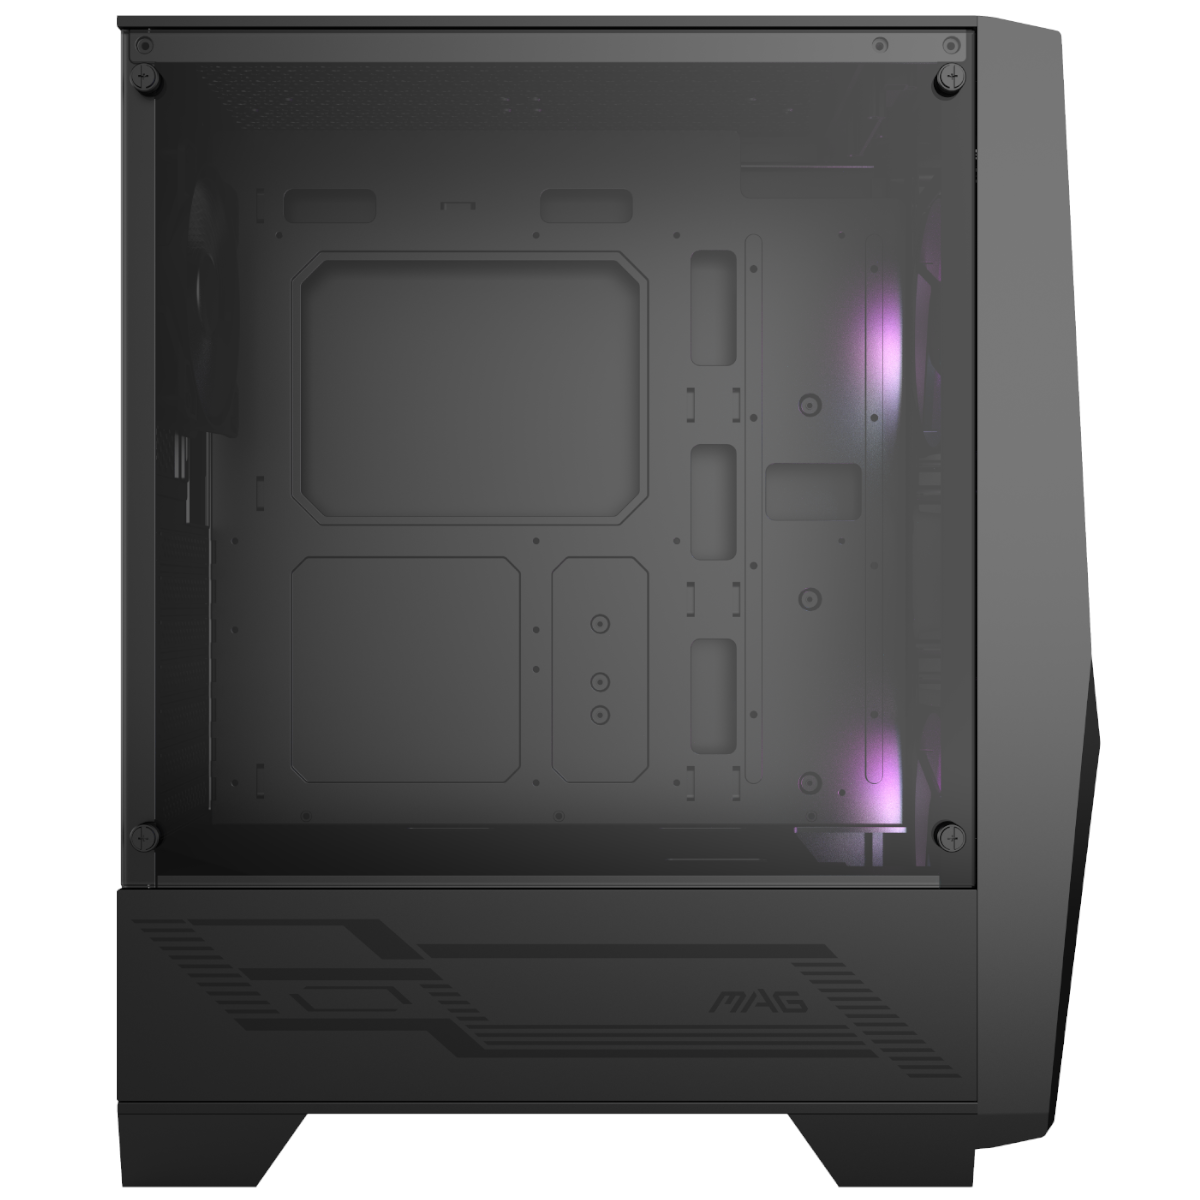 MSI - MSI MAG FORGE 100R Mid-Tower ARGB Gaming Case - Black Tempered Glass